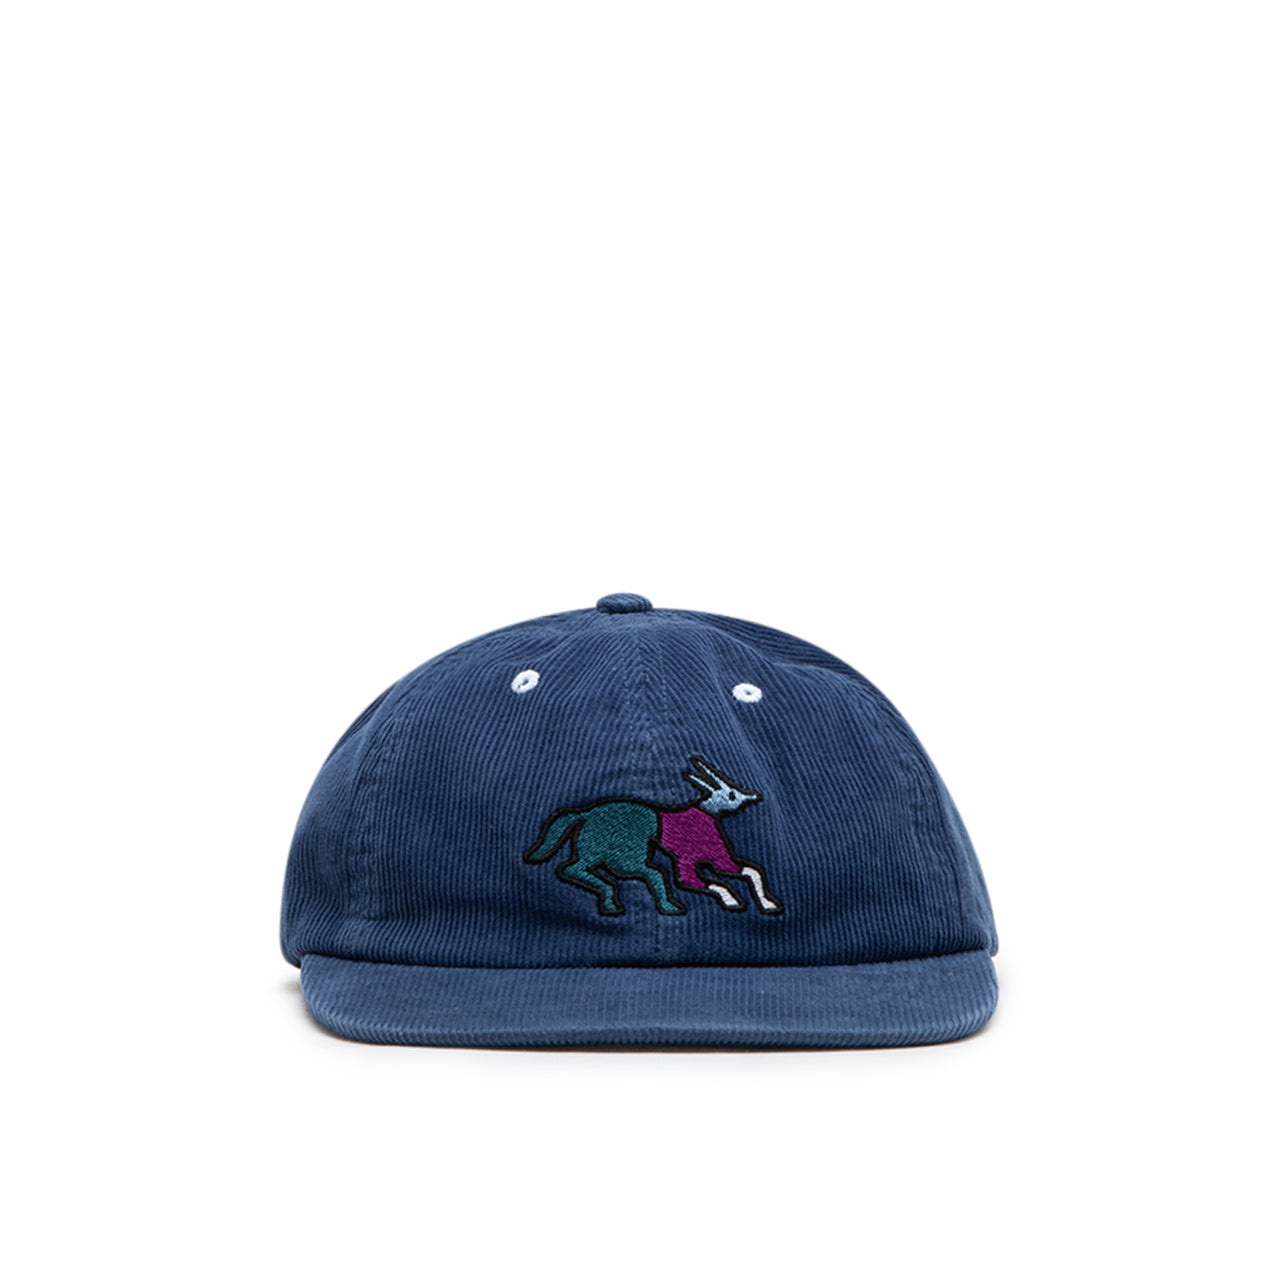 by Parra Anxious Dog 6 Panel Hat (Blau)  - Allike Store